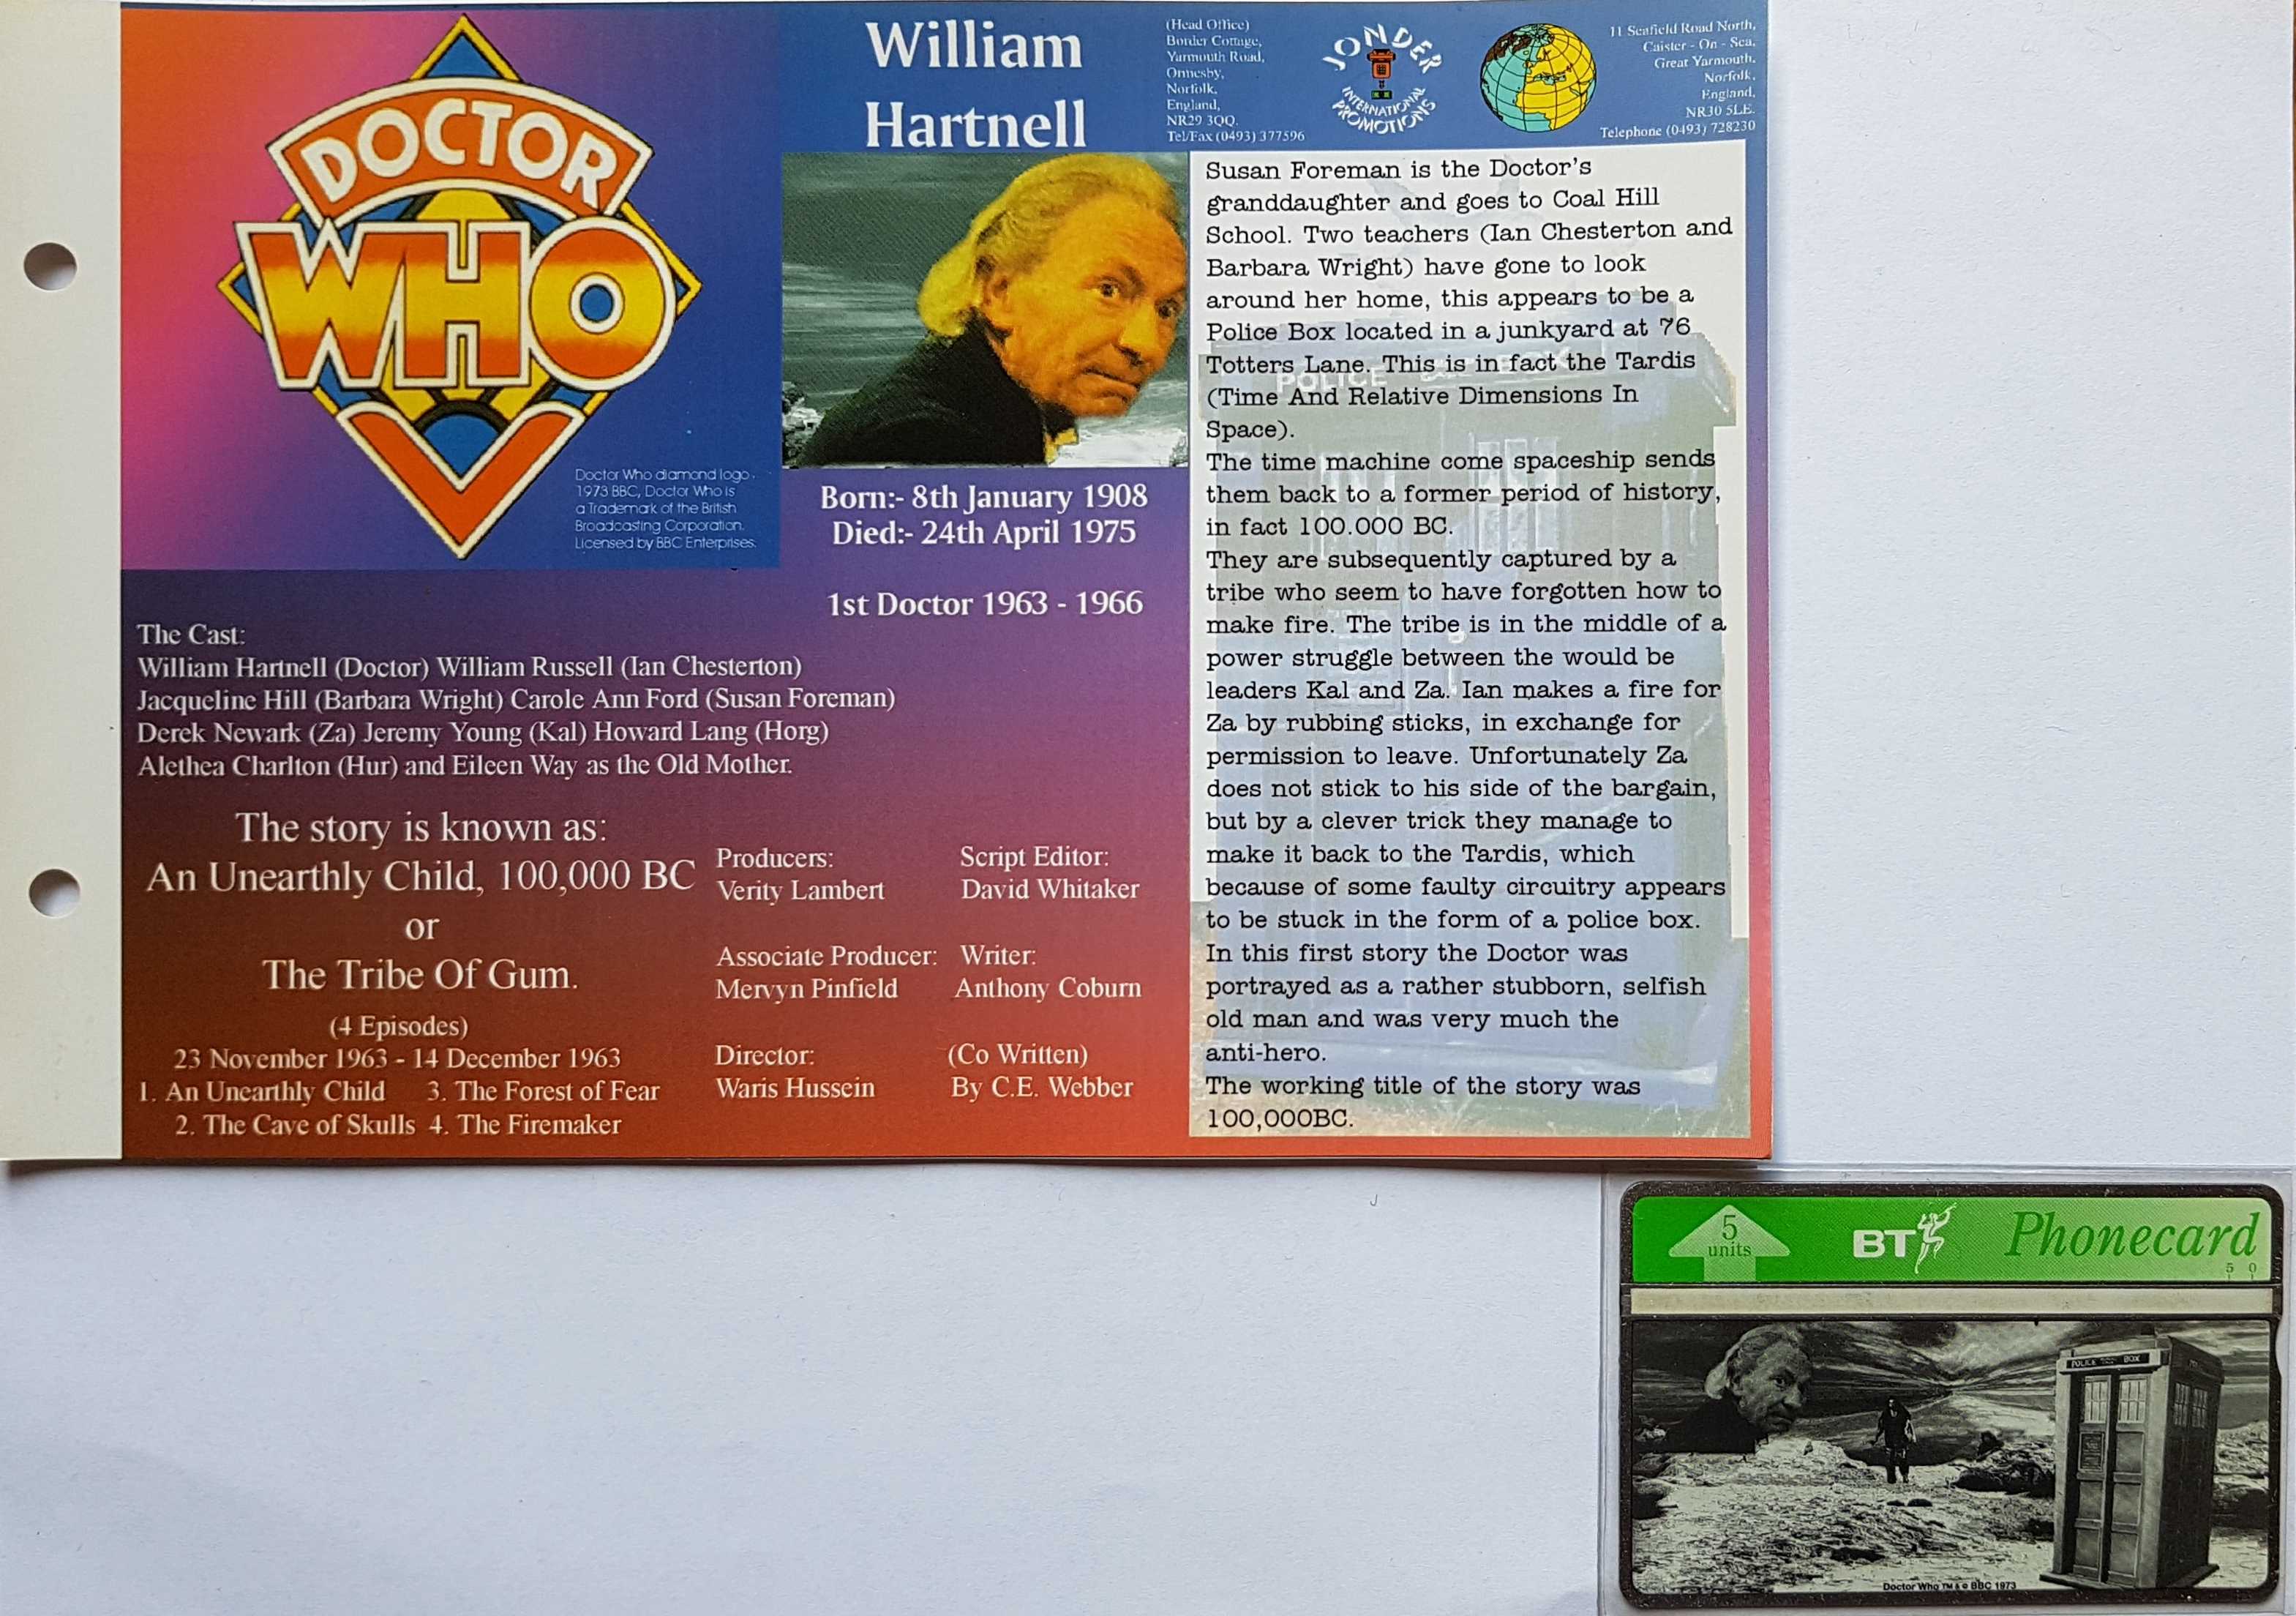 Picture of Doctor Who - An unearthly child - Phone card by artist  from the BBC anything_else - Records and Tapes library